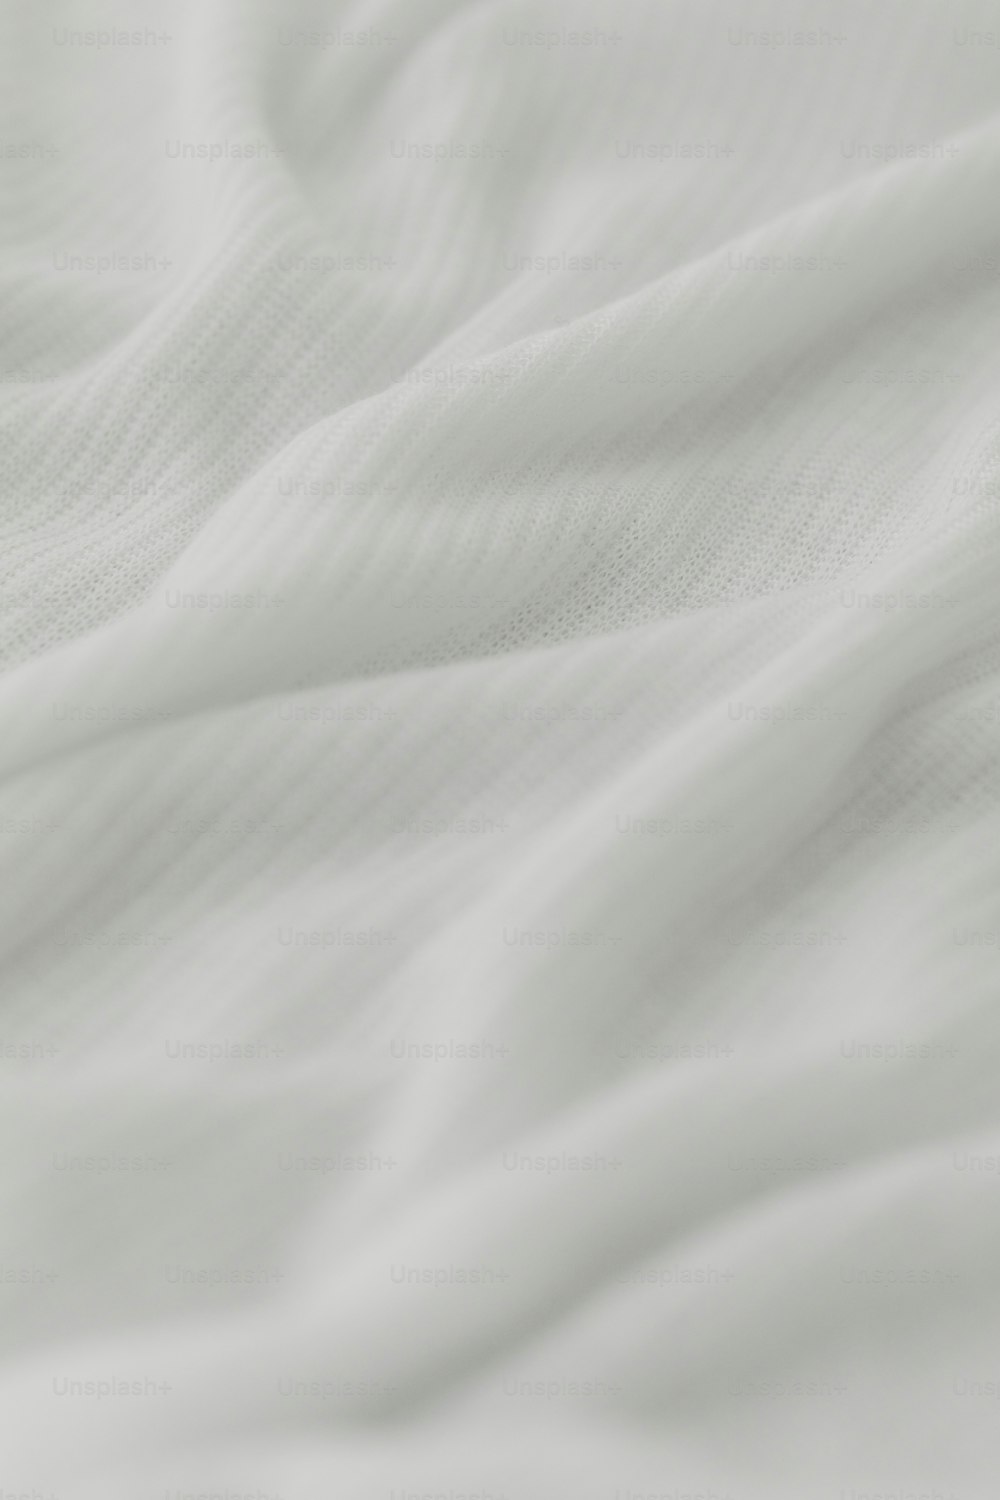 6,138,018 White Textile Texture Images, Stock Photos, 3D objects